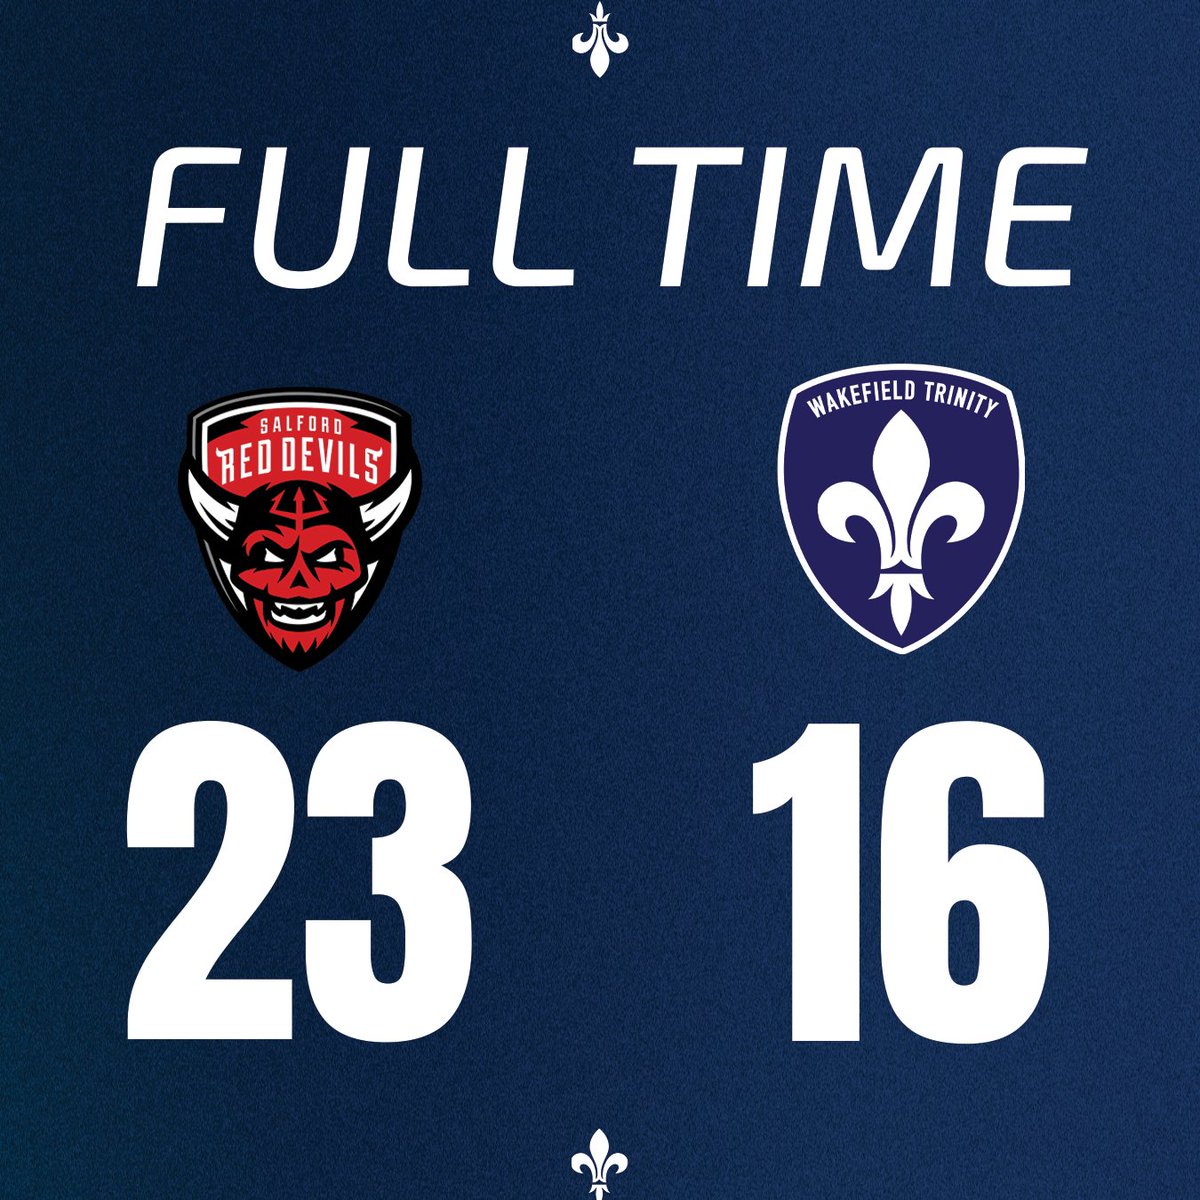 RESERVES FULL TIME: Salford Red Devils 23-16 Wakefield Trinity Tries from Tom Delaney, Cass Walker-Smith and Luke Bain saw Trinity fight back and lead throughout parts of the second half but the home side proved too tough in the end. #UpTheTrin